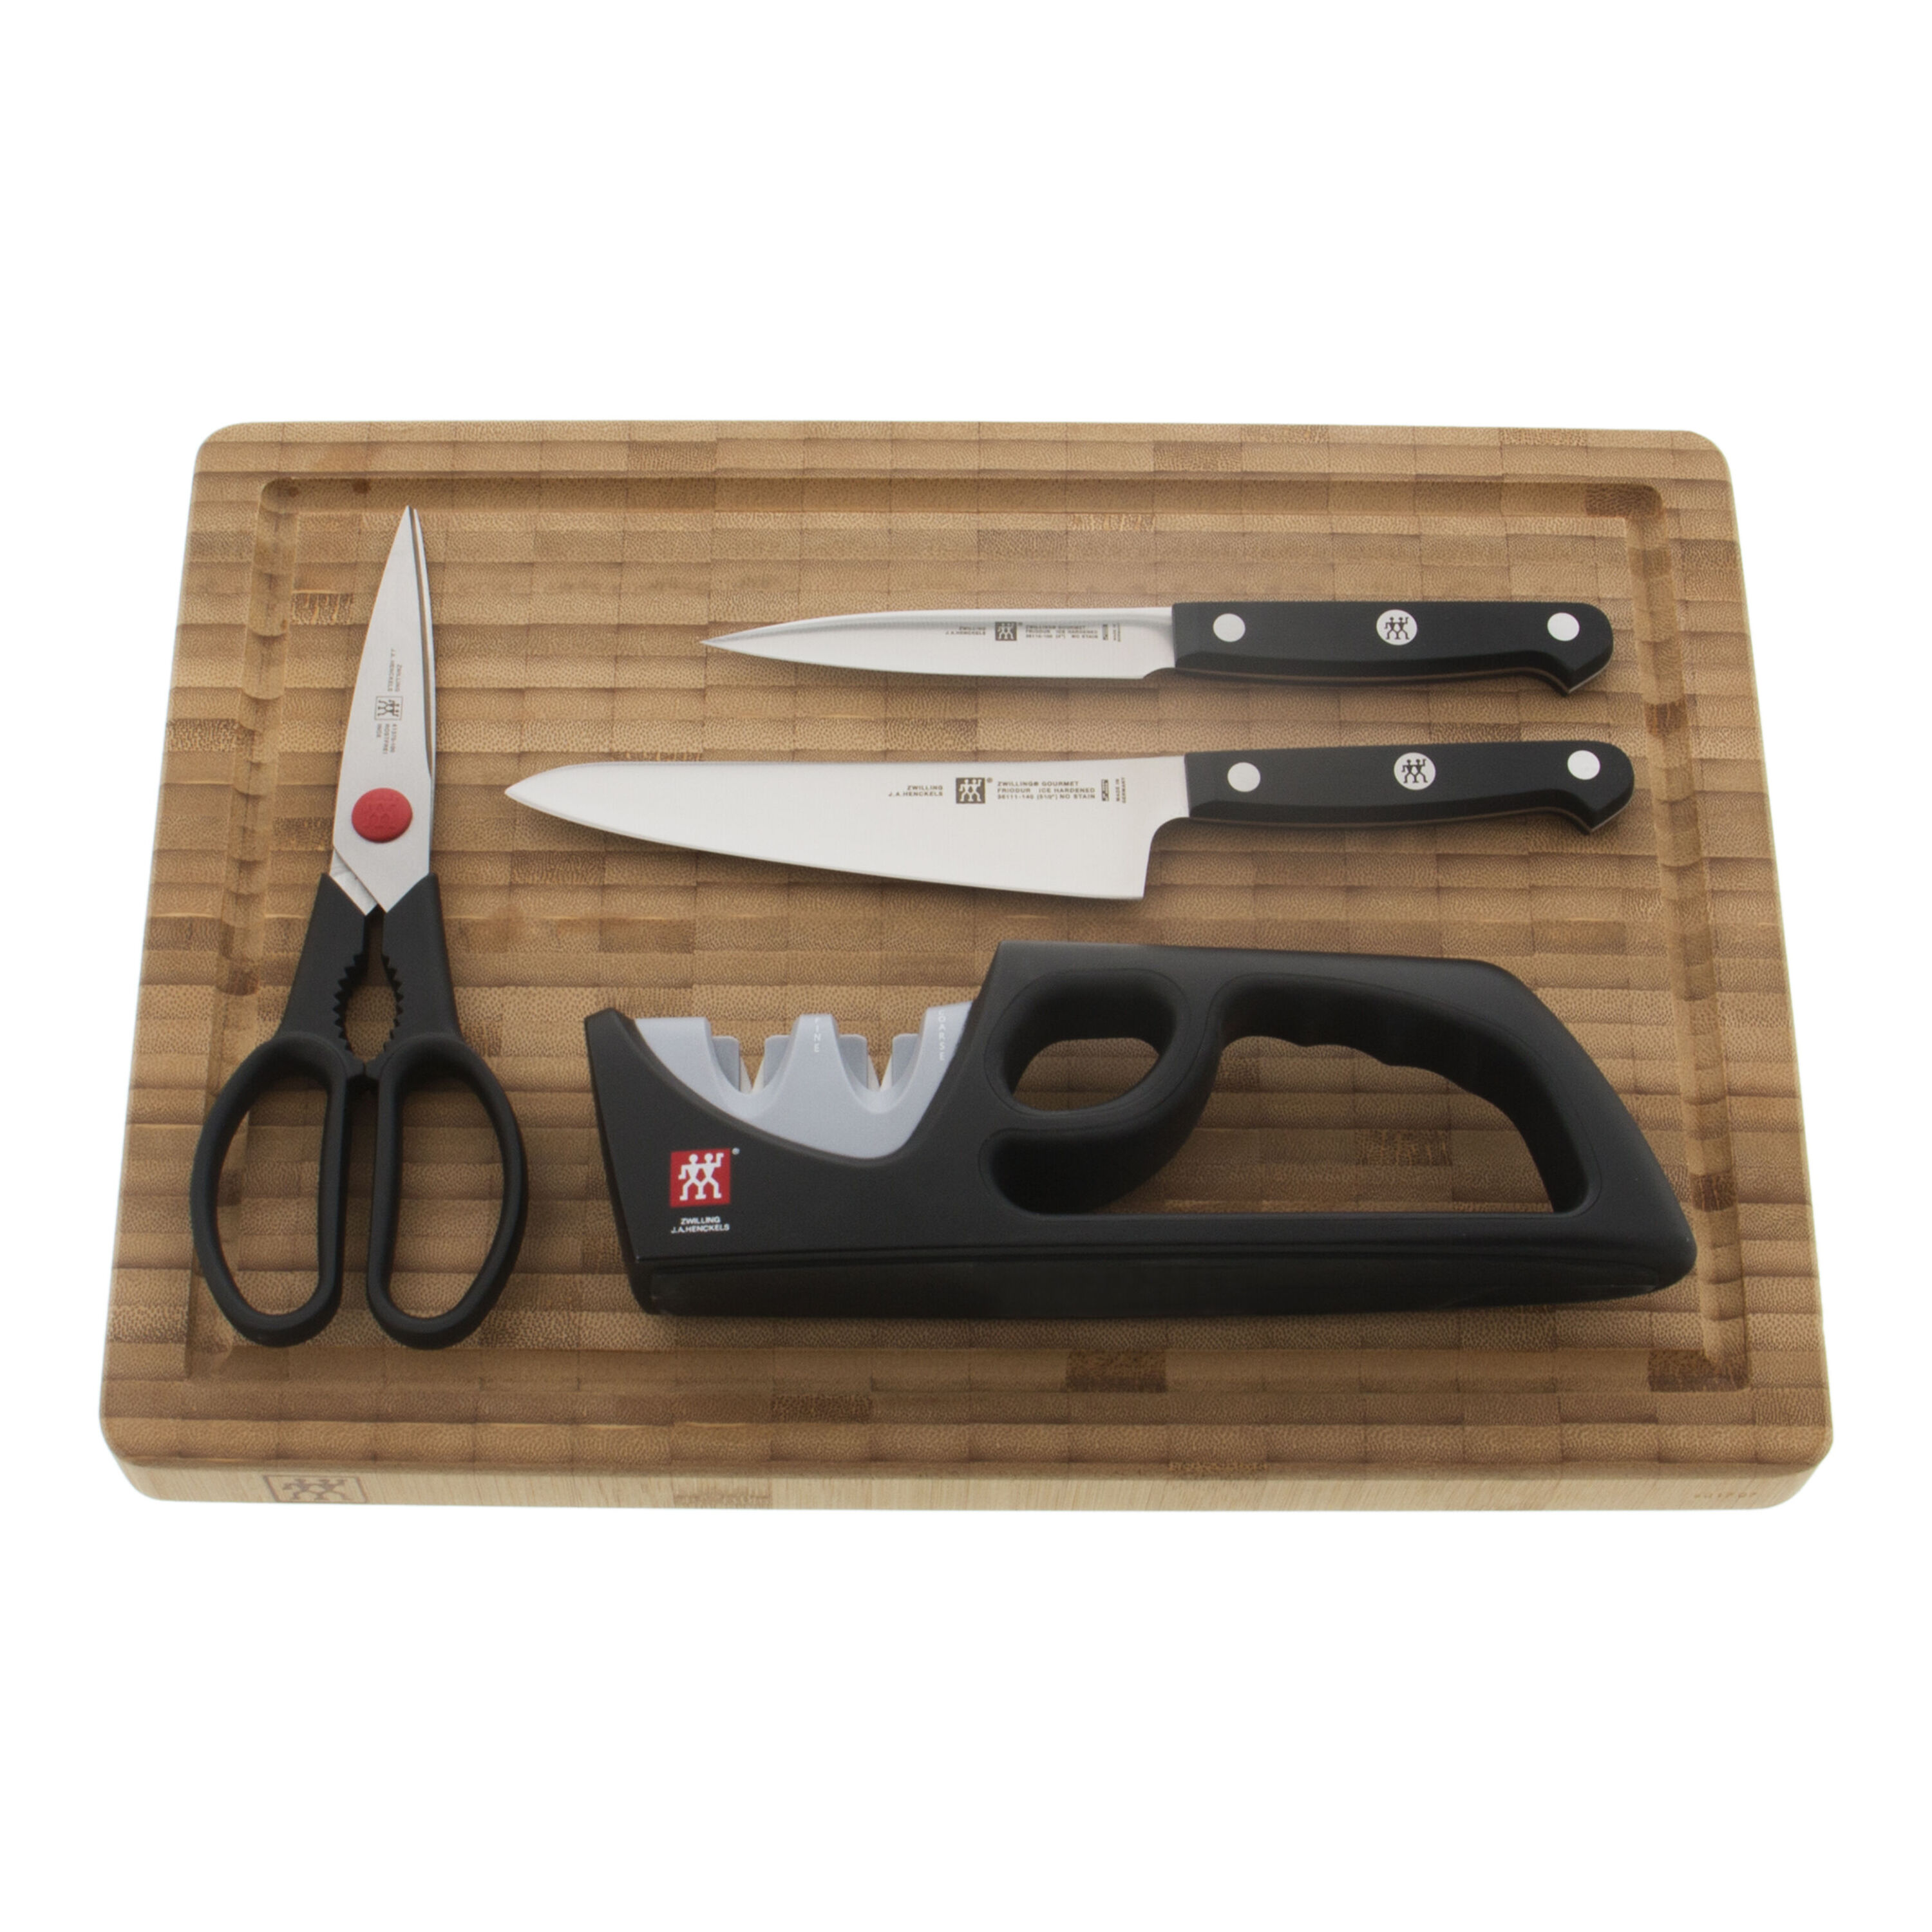  ZWILLING J.A. Henckels Zwilling gourmet 7-pc knife